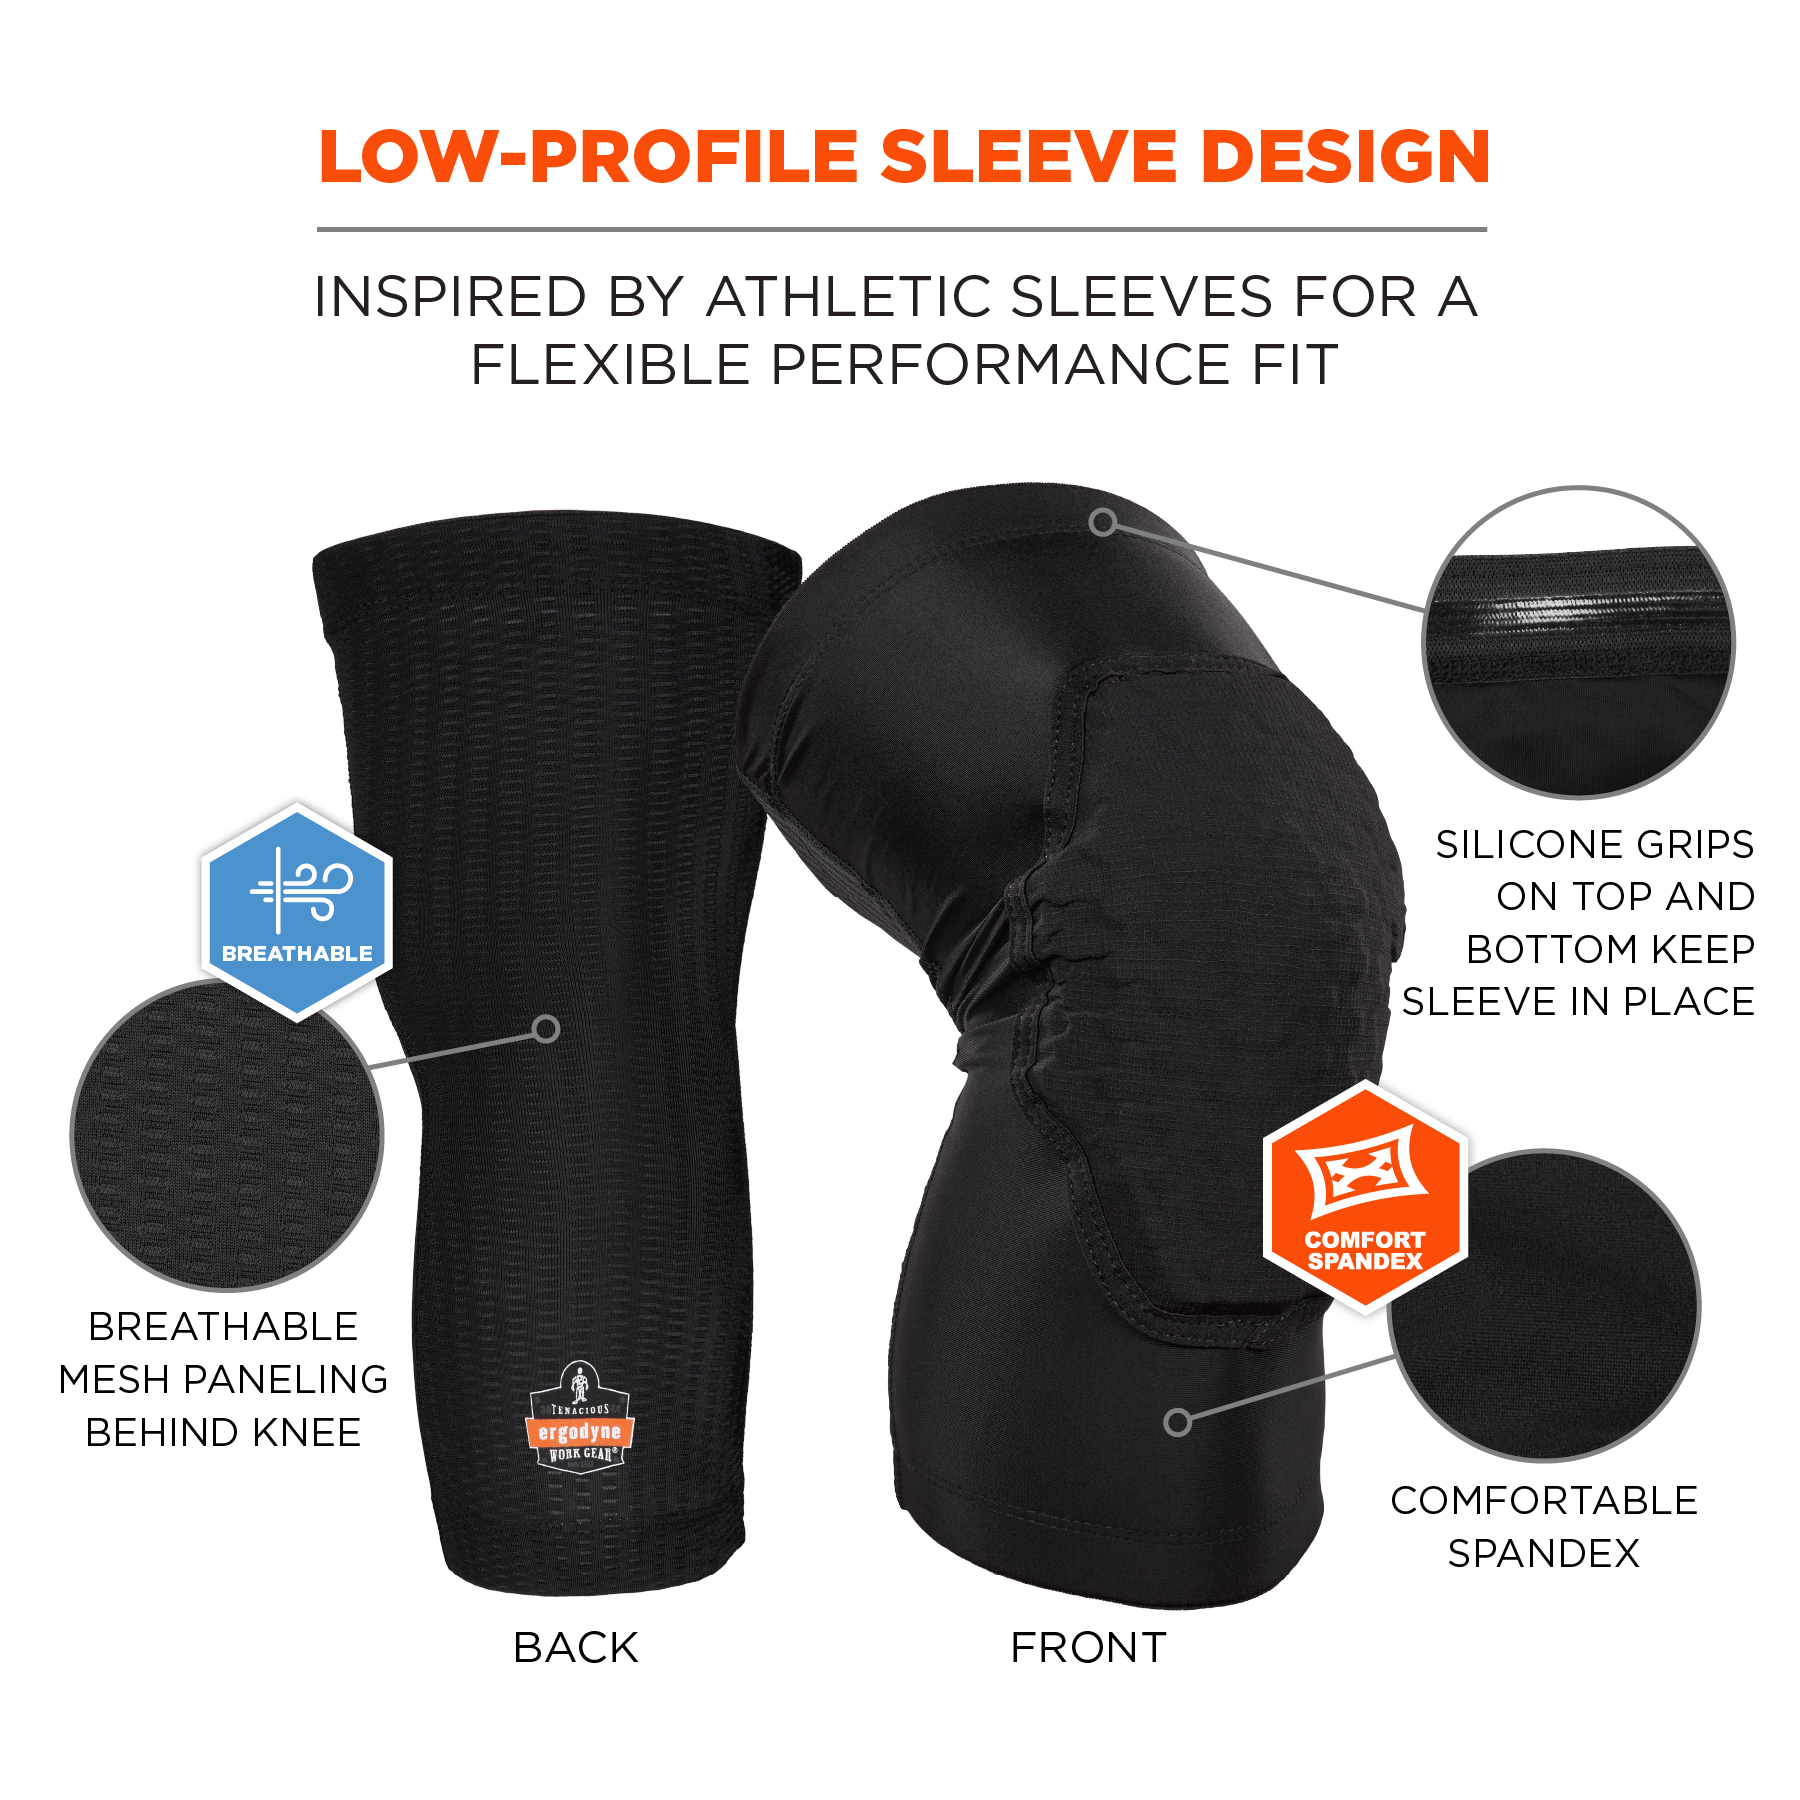 Basketball Protective Gear & Impact Resistant Pads